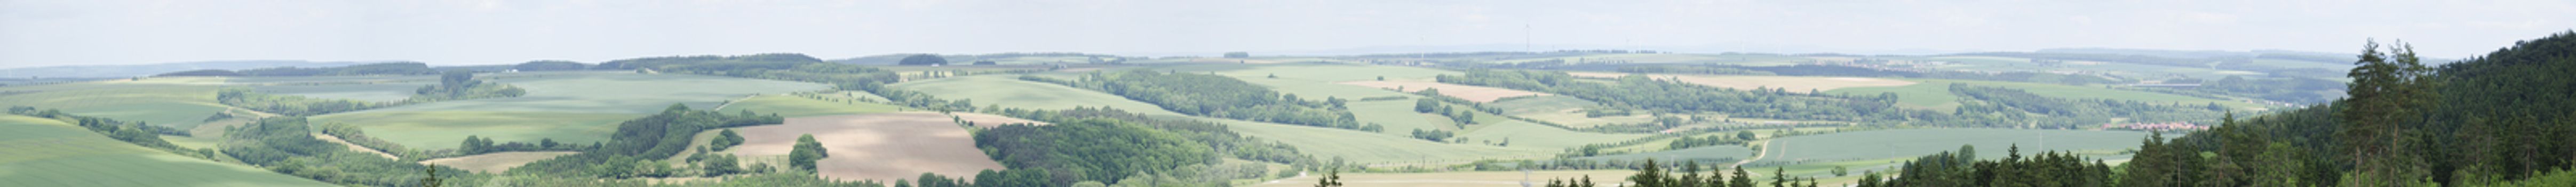 Landscape in the central part of Germany, Eichsfeld 